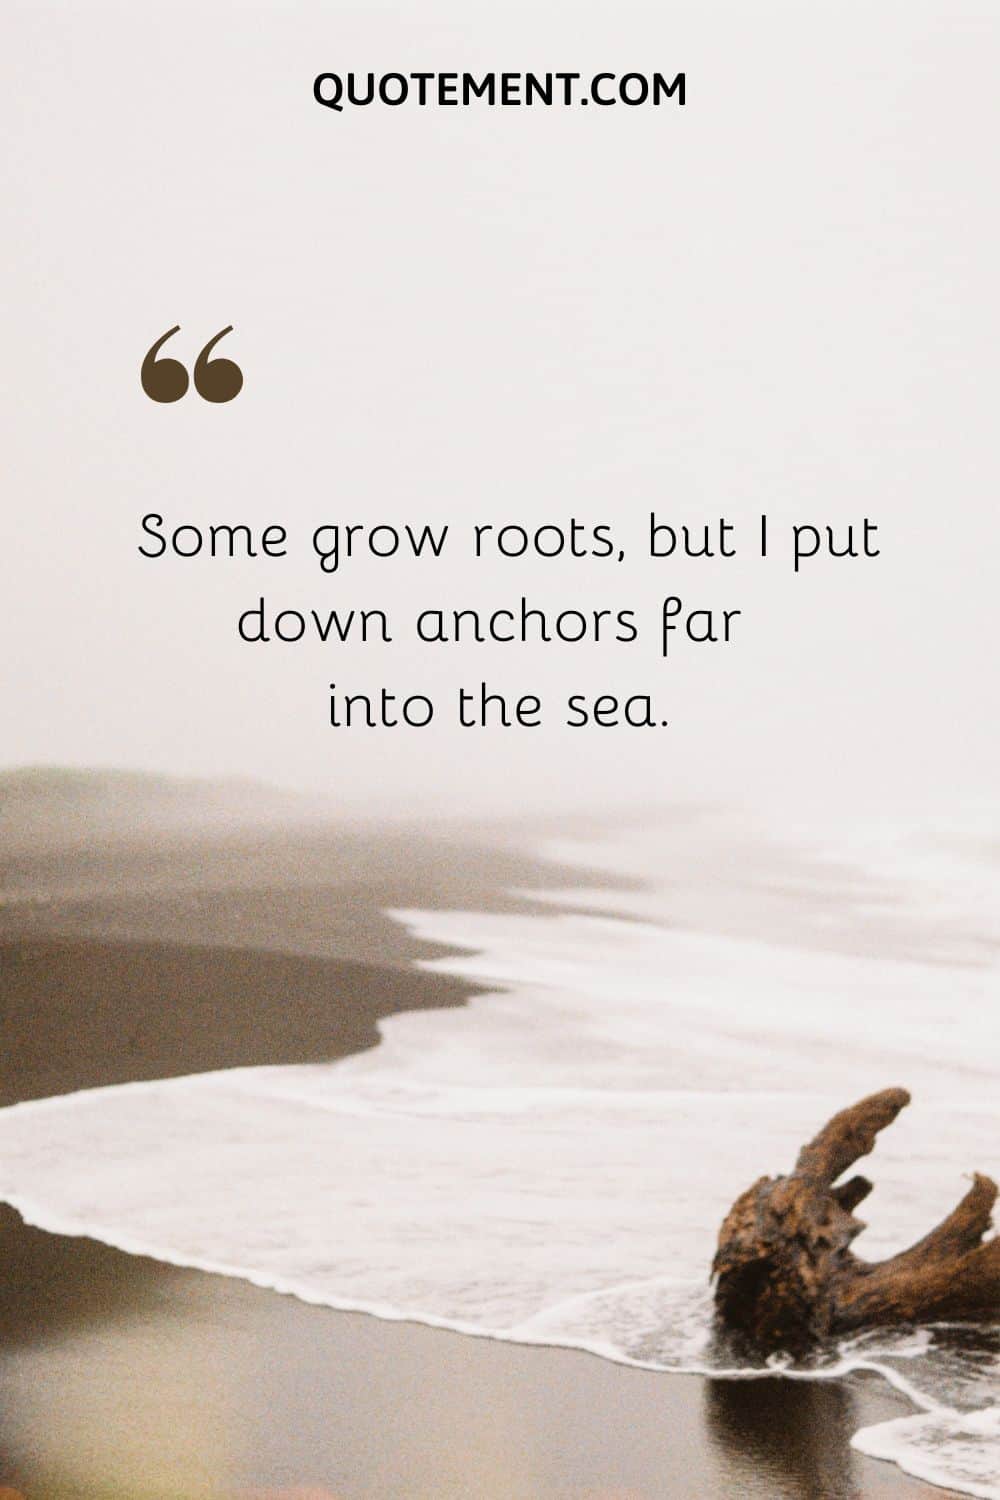 Some grow roots, but I put down anchors far into the sea.